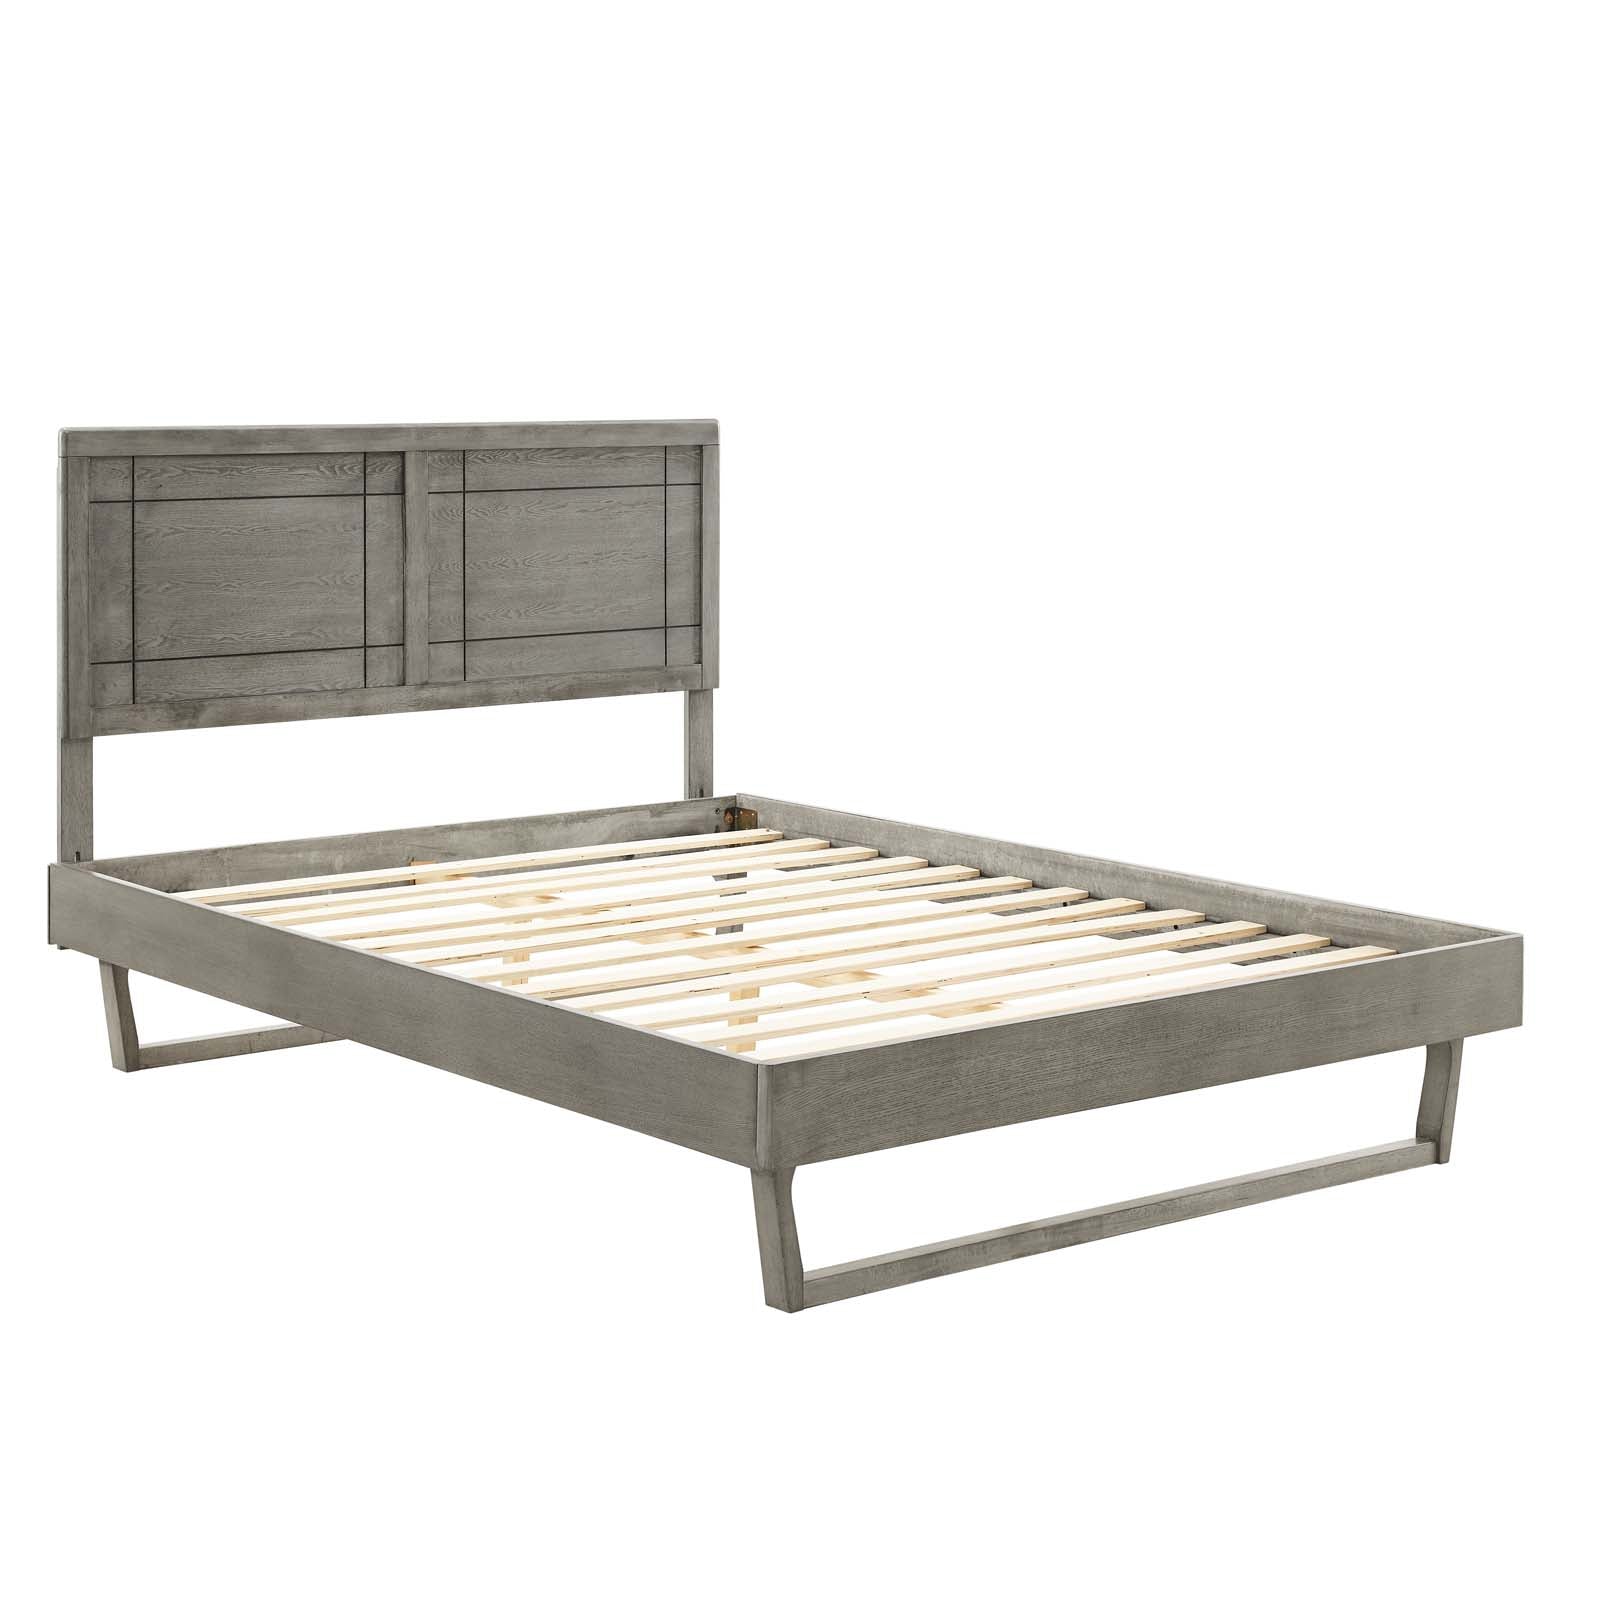 Modway Beds - Marlee Queen Wood Platform Bed With Angular Frame Gray